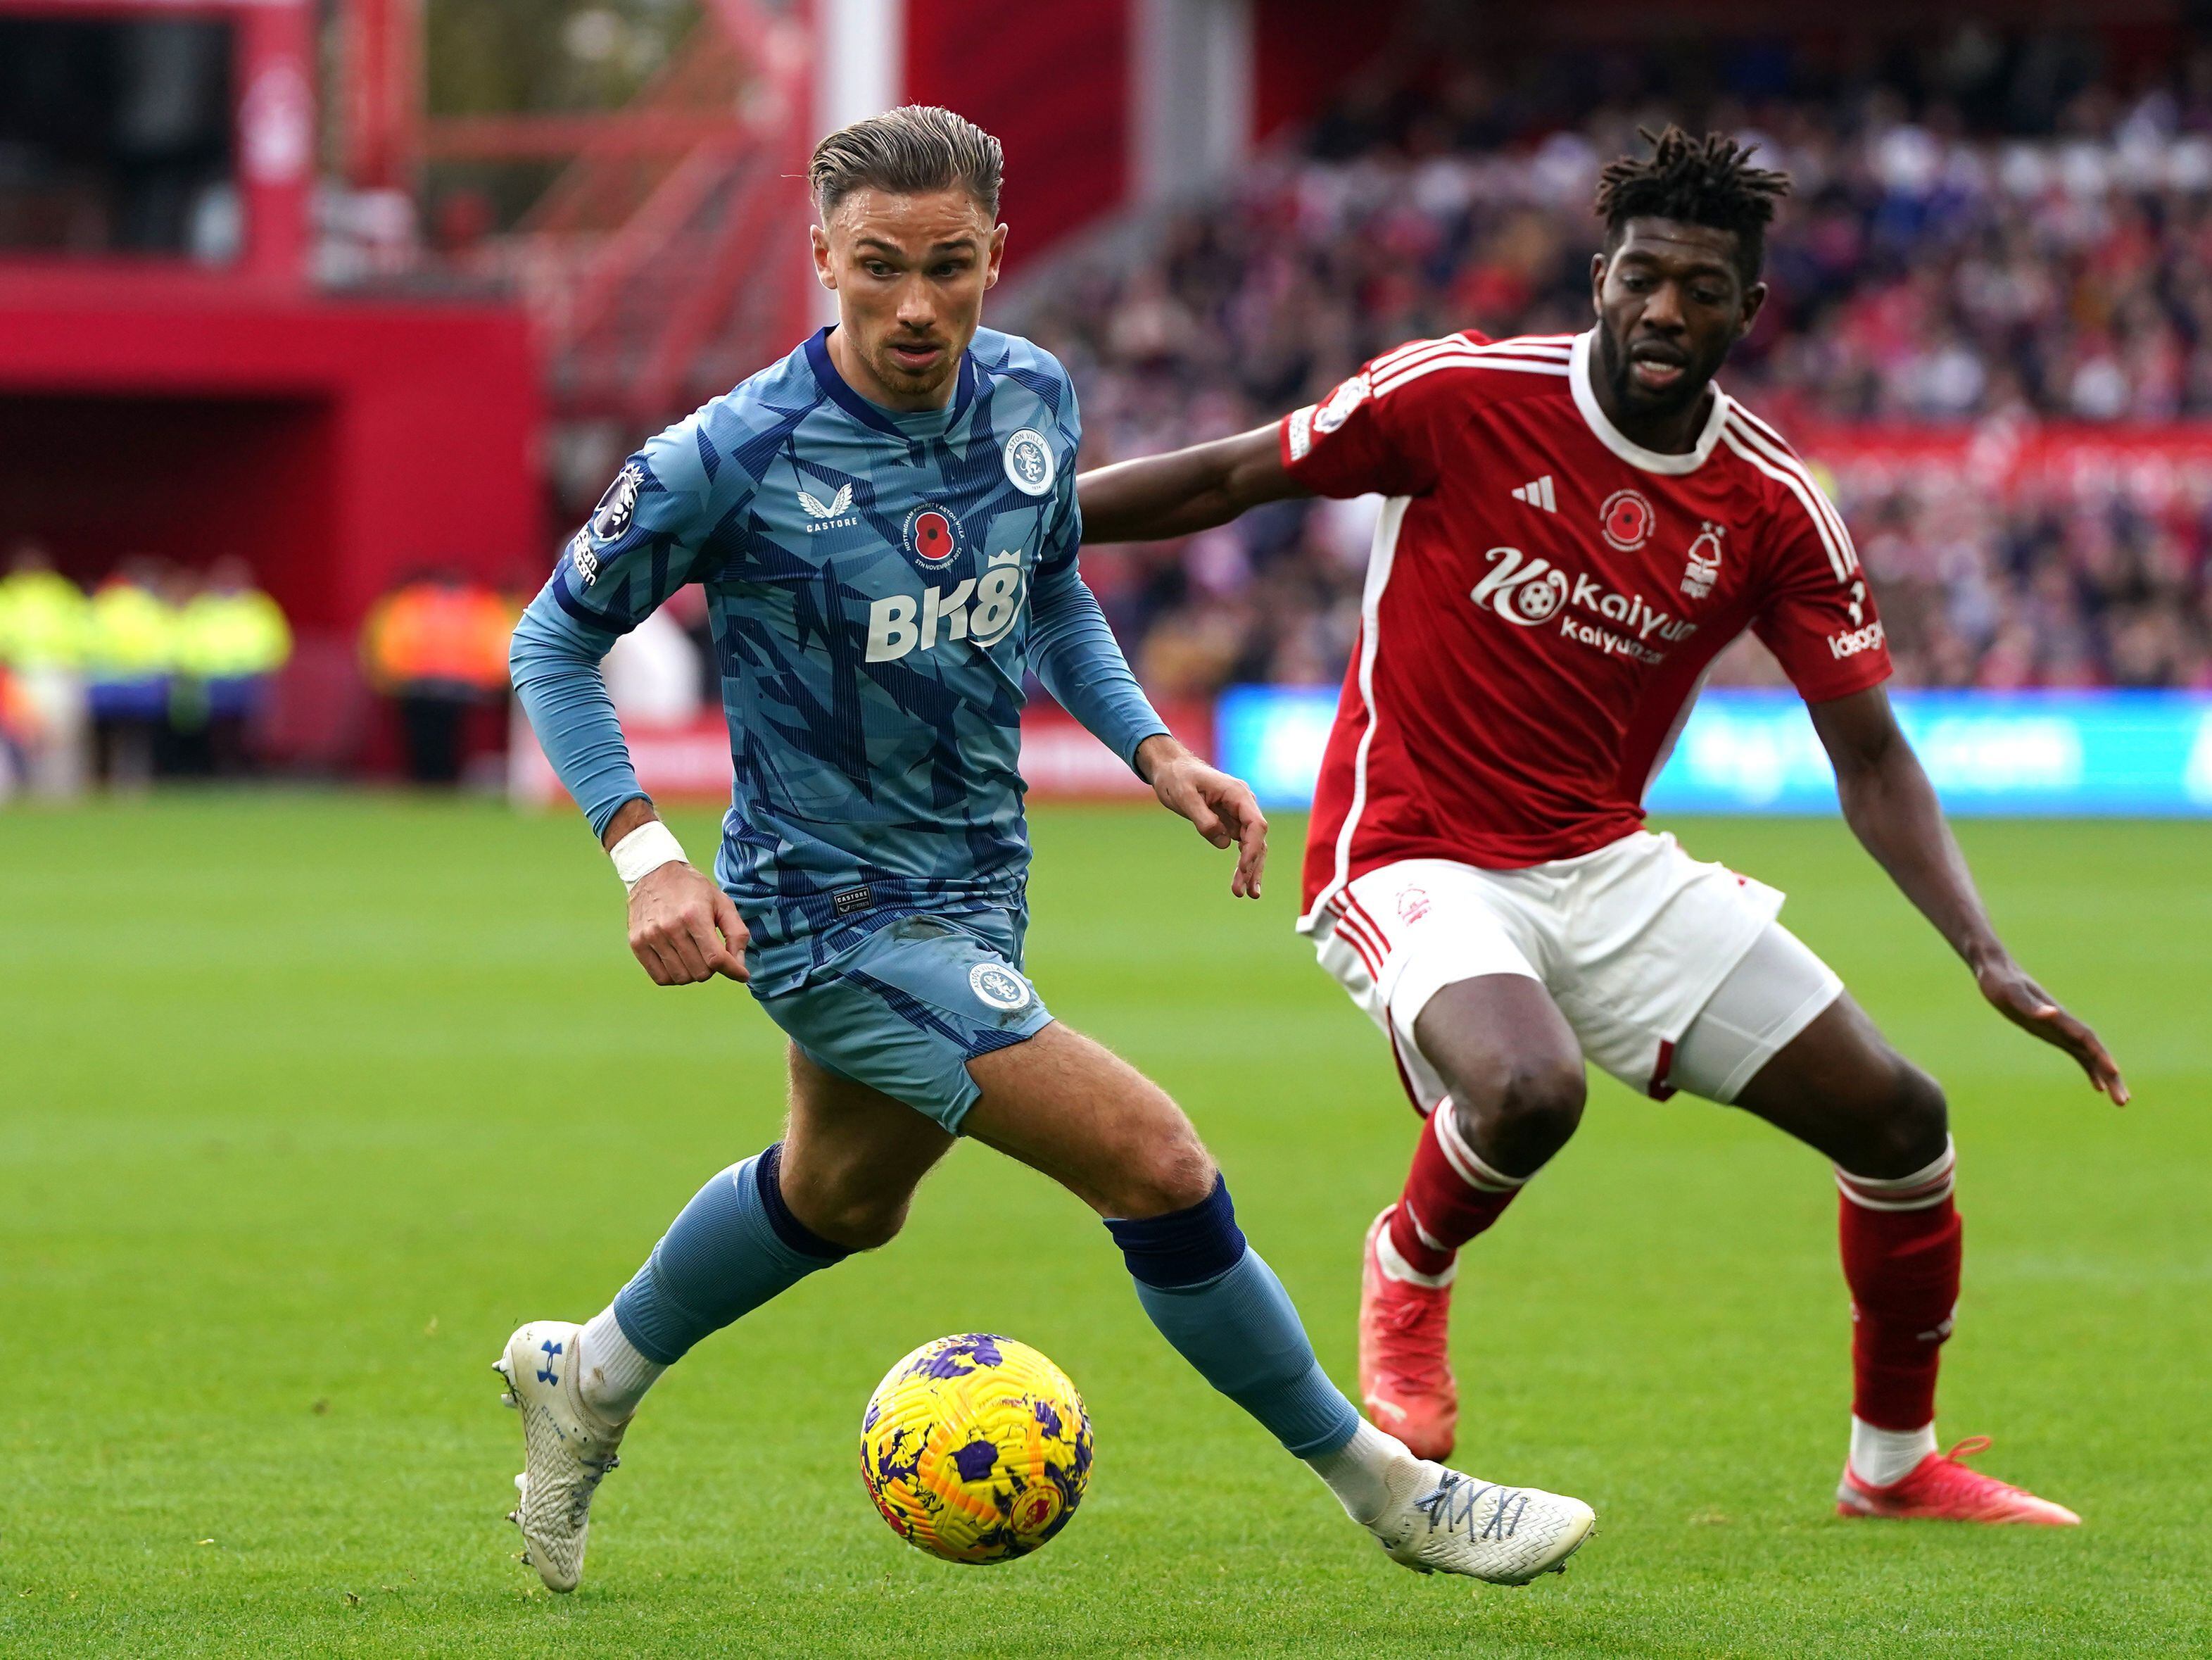 Nottingham Forest 2 Aston Villa 0 - player ratings: Too many off days for Villa